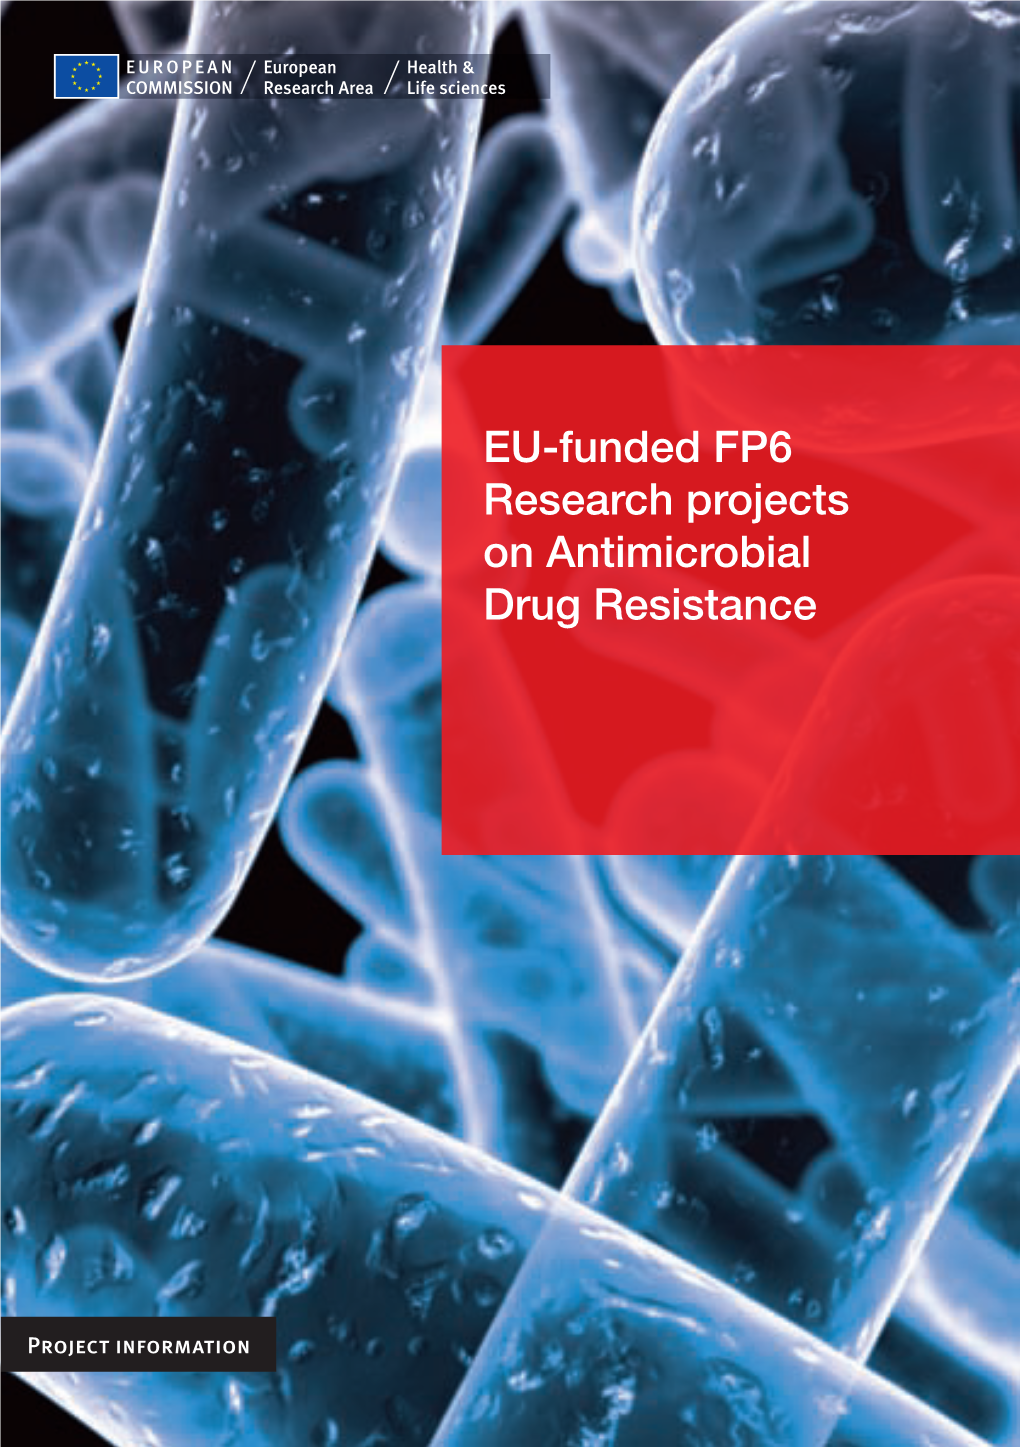 EU-Funded FP6 Research Projects on Antimicrobial Drug Resistance